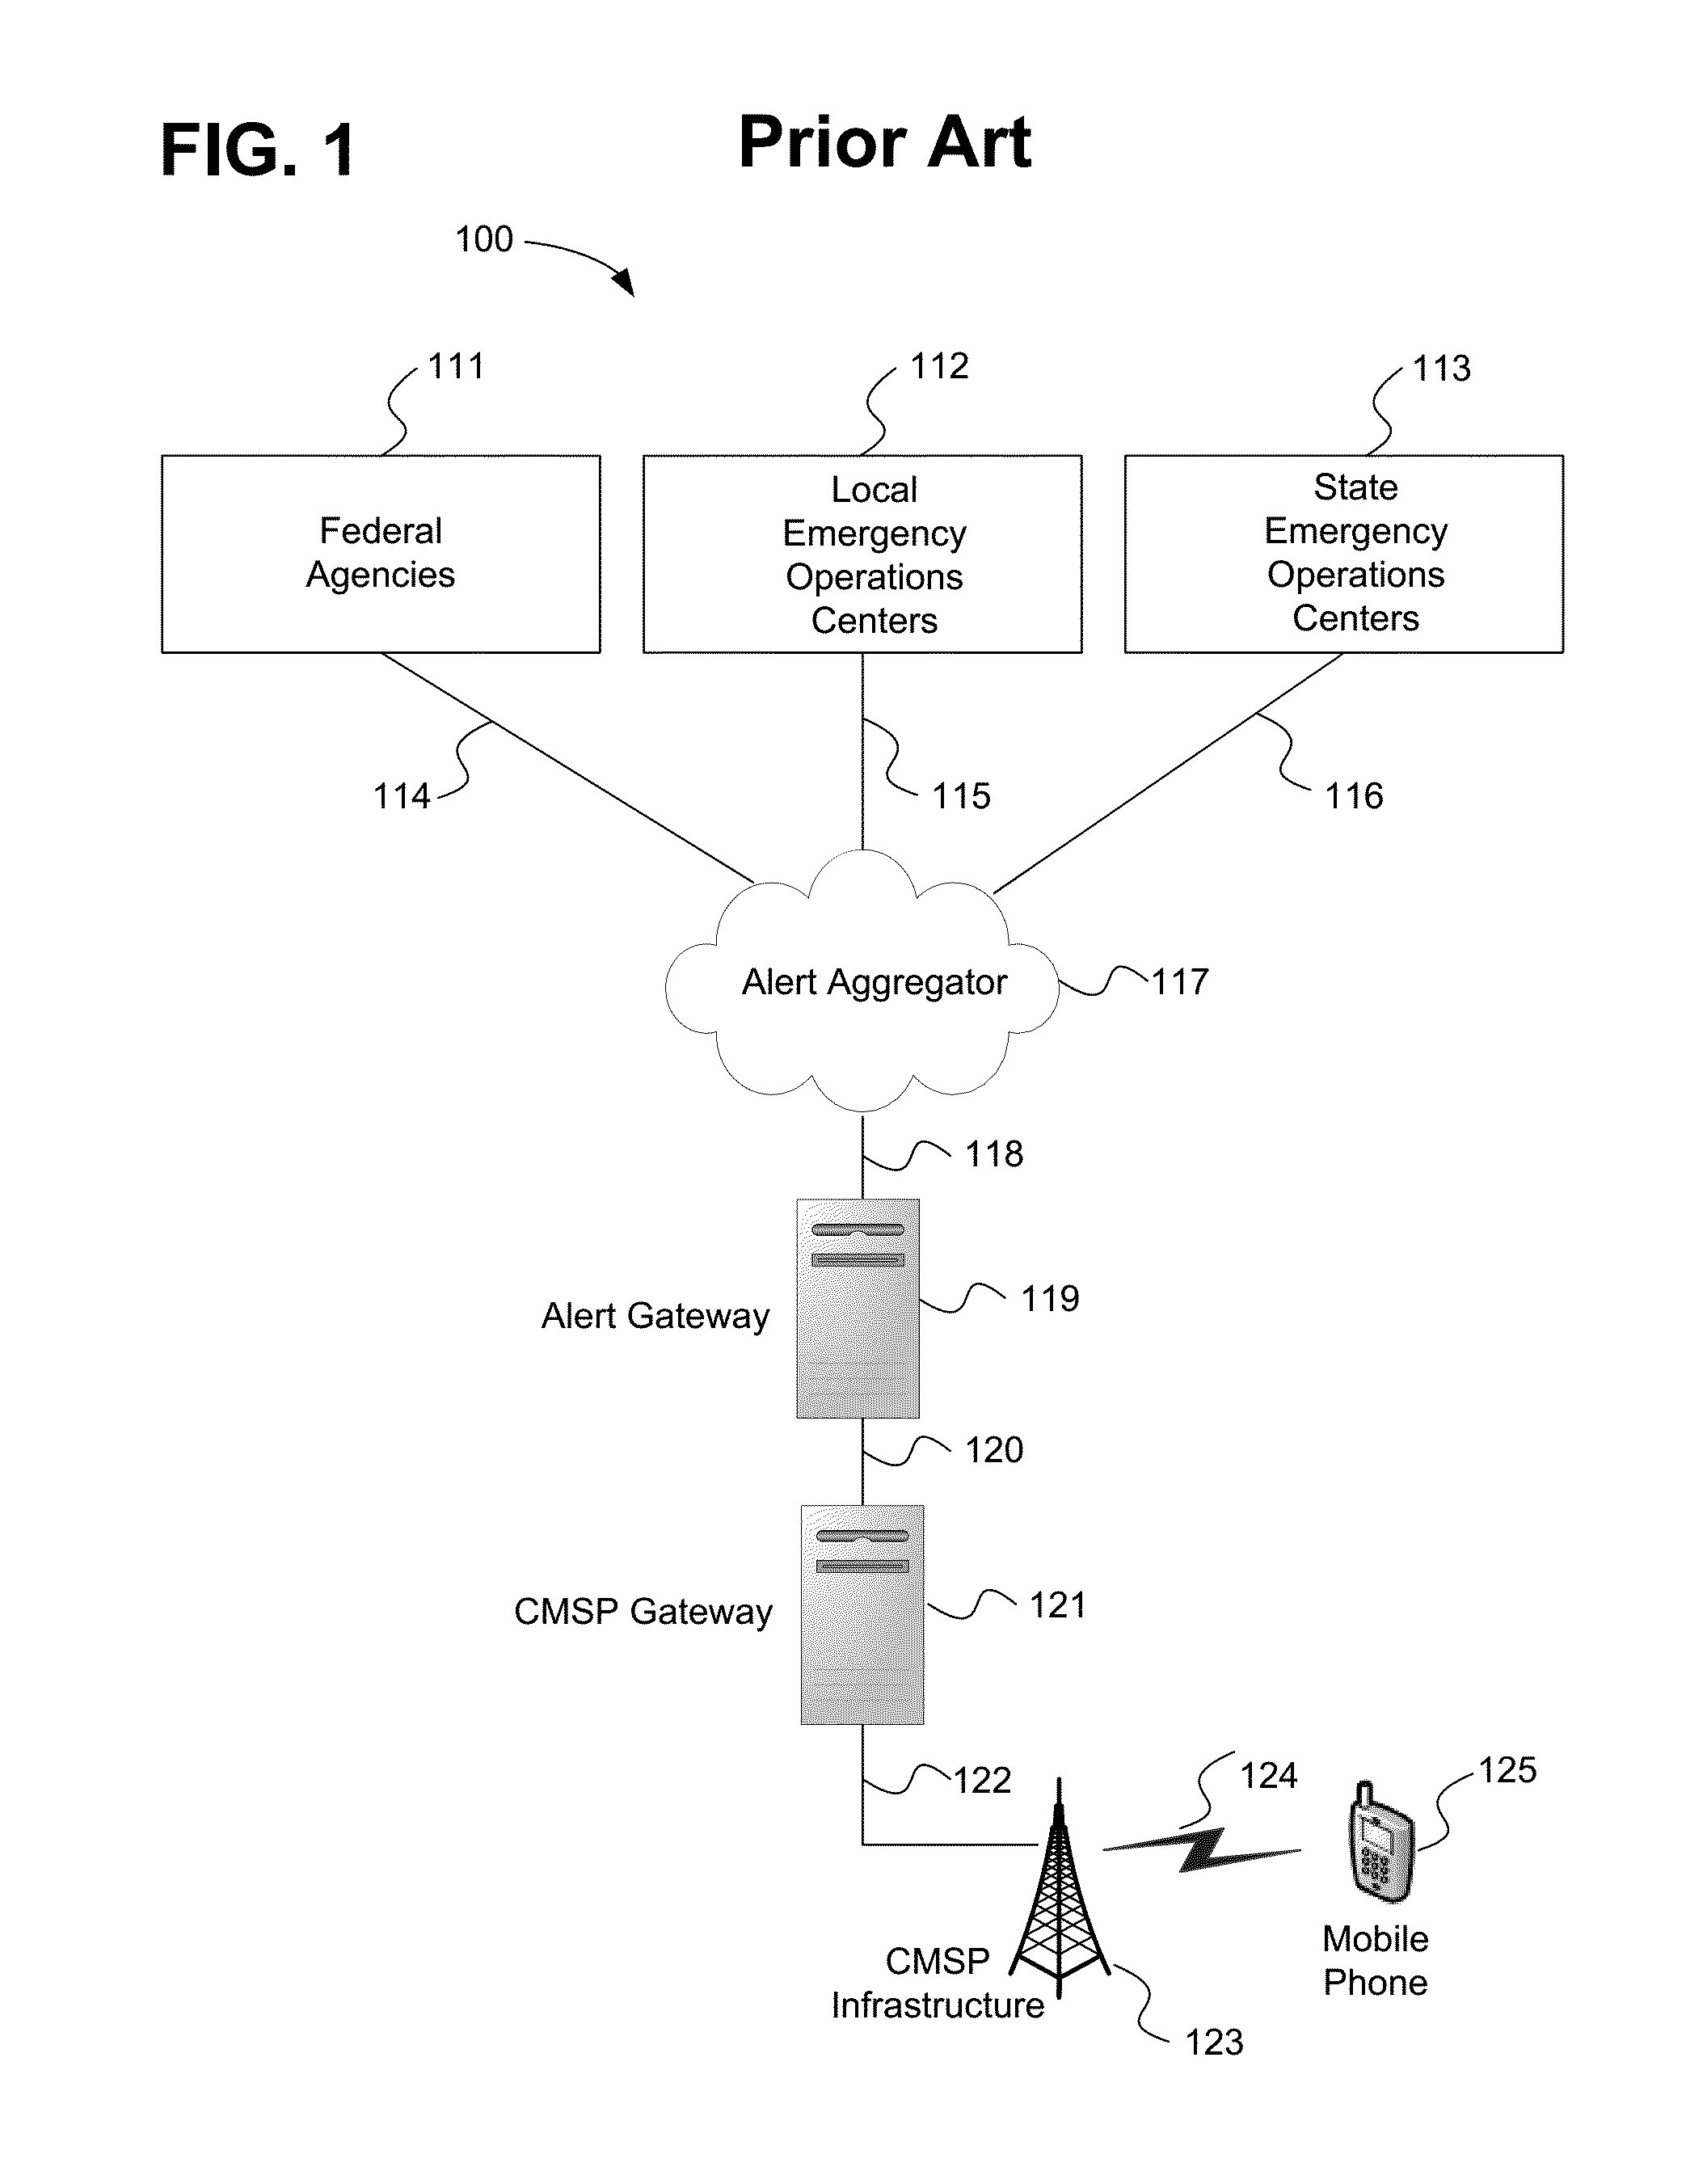 System and method for flexibly sending commercial mobile alert system messages (CMAS) and earthquake and tsunami warning system (EWTS) alert messages